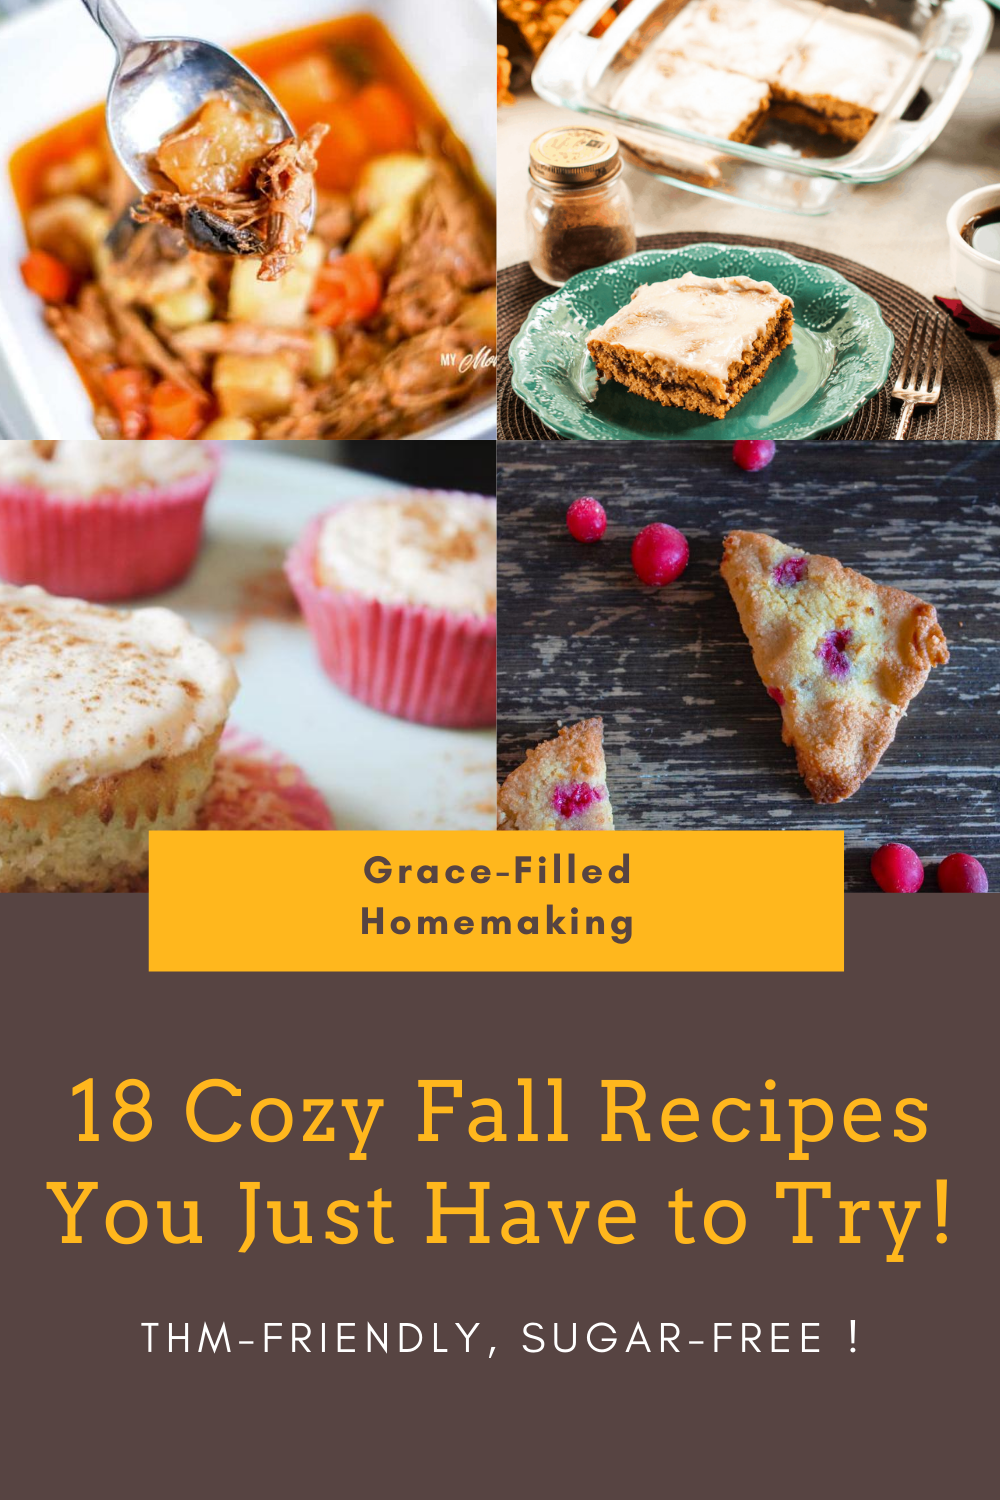 Here is a delicious collection of cozy Fall recipes that are THM-friendly  and sugar-free! Welcome Fall AND stay on plan!